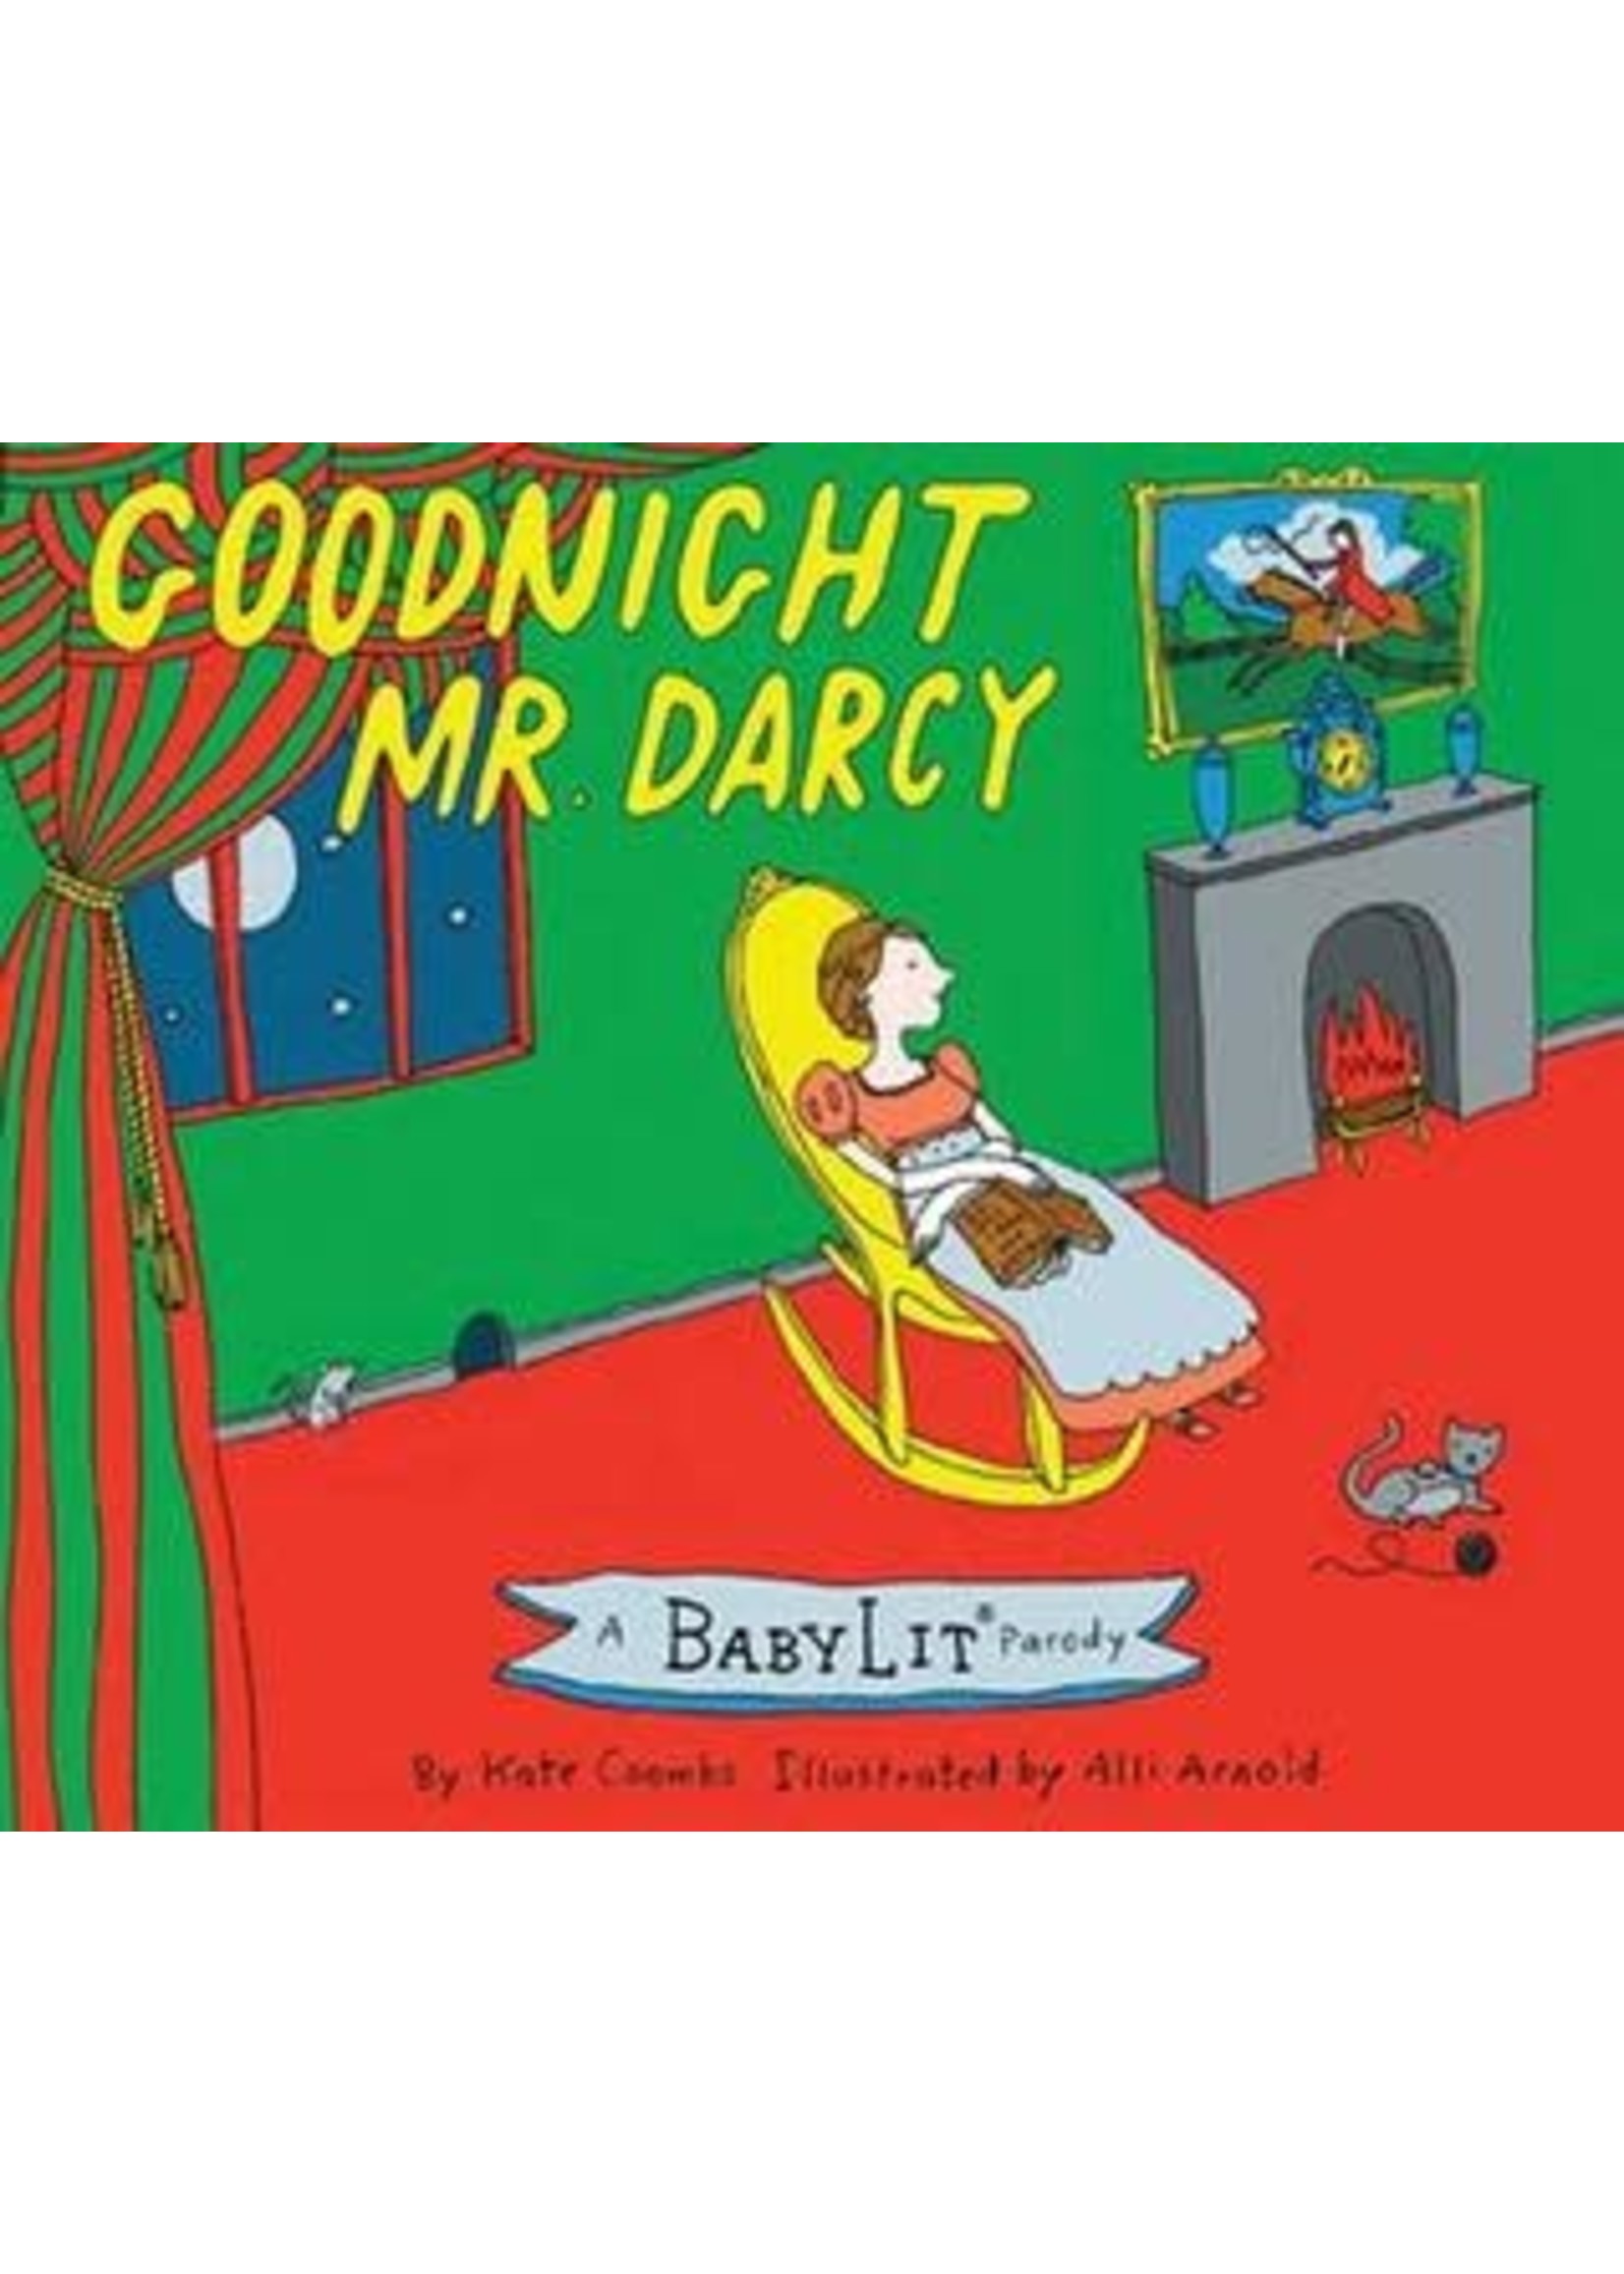 Goodnight Mr. Darcy: A BabyLit Parody Board Book by Kate Coombs